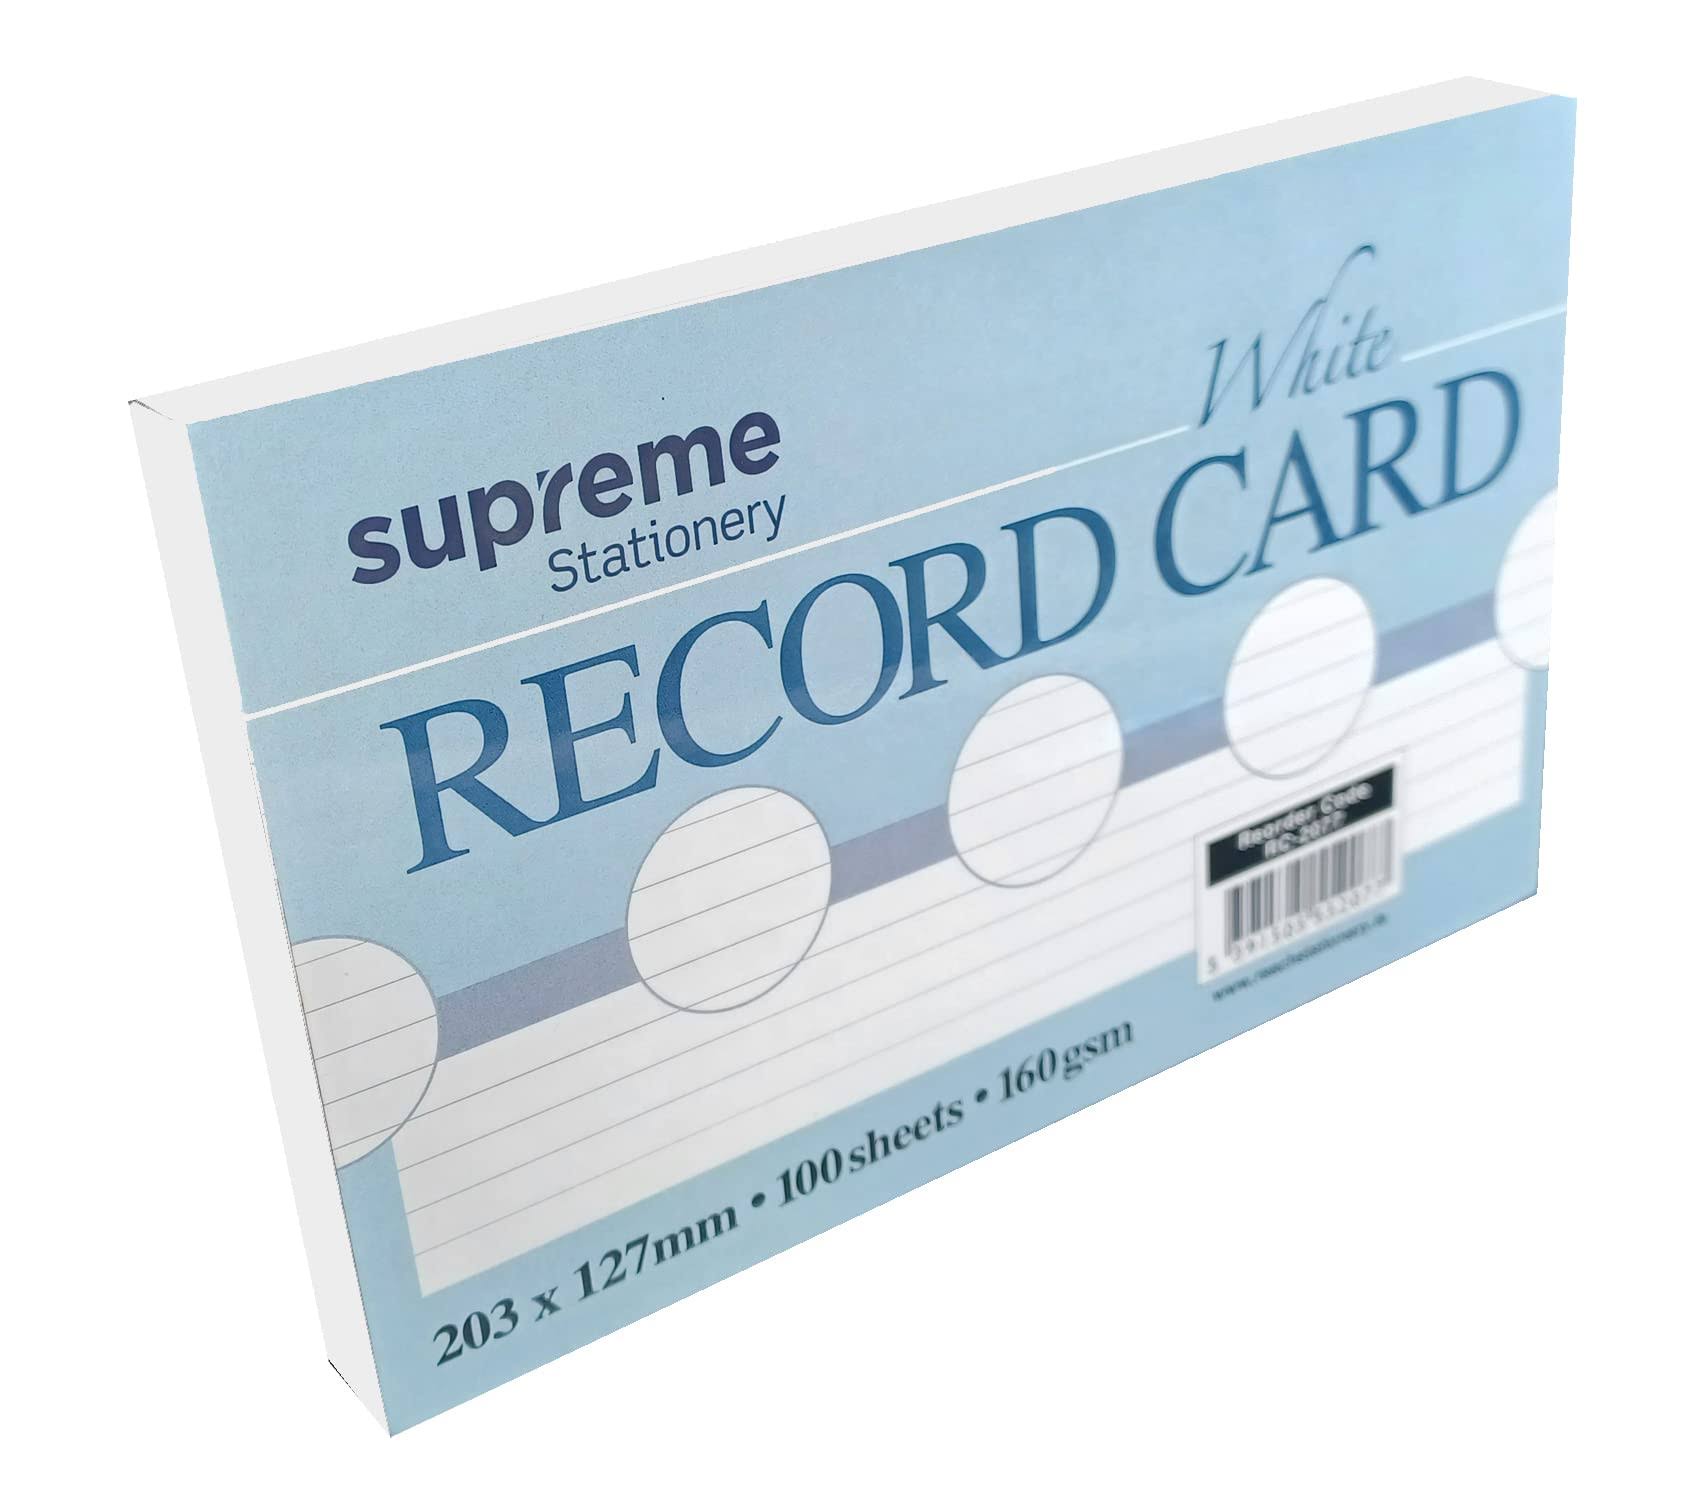 Supreme Ruled Record Cards - White